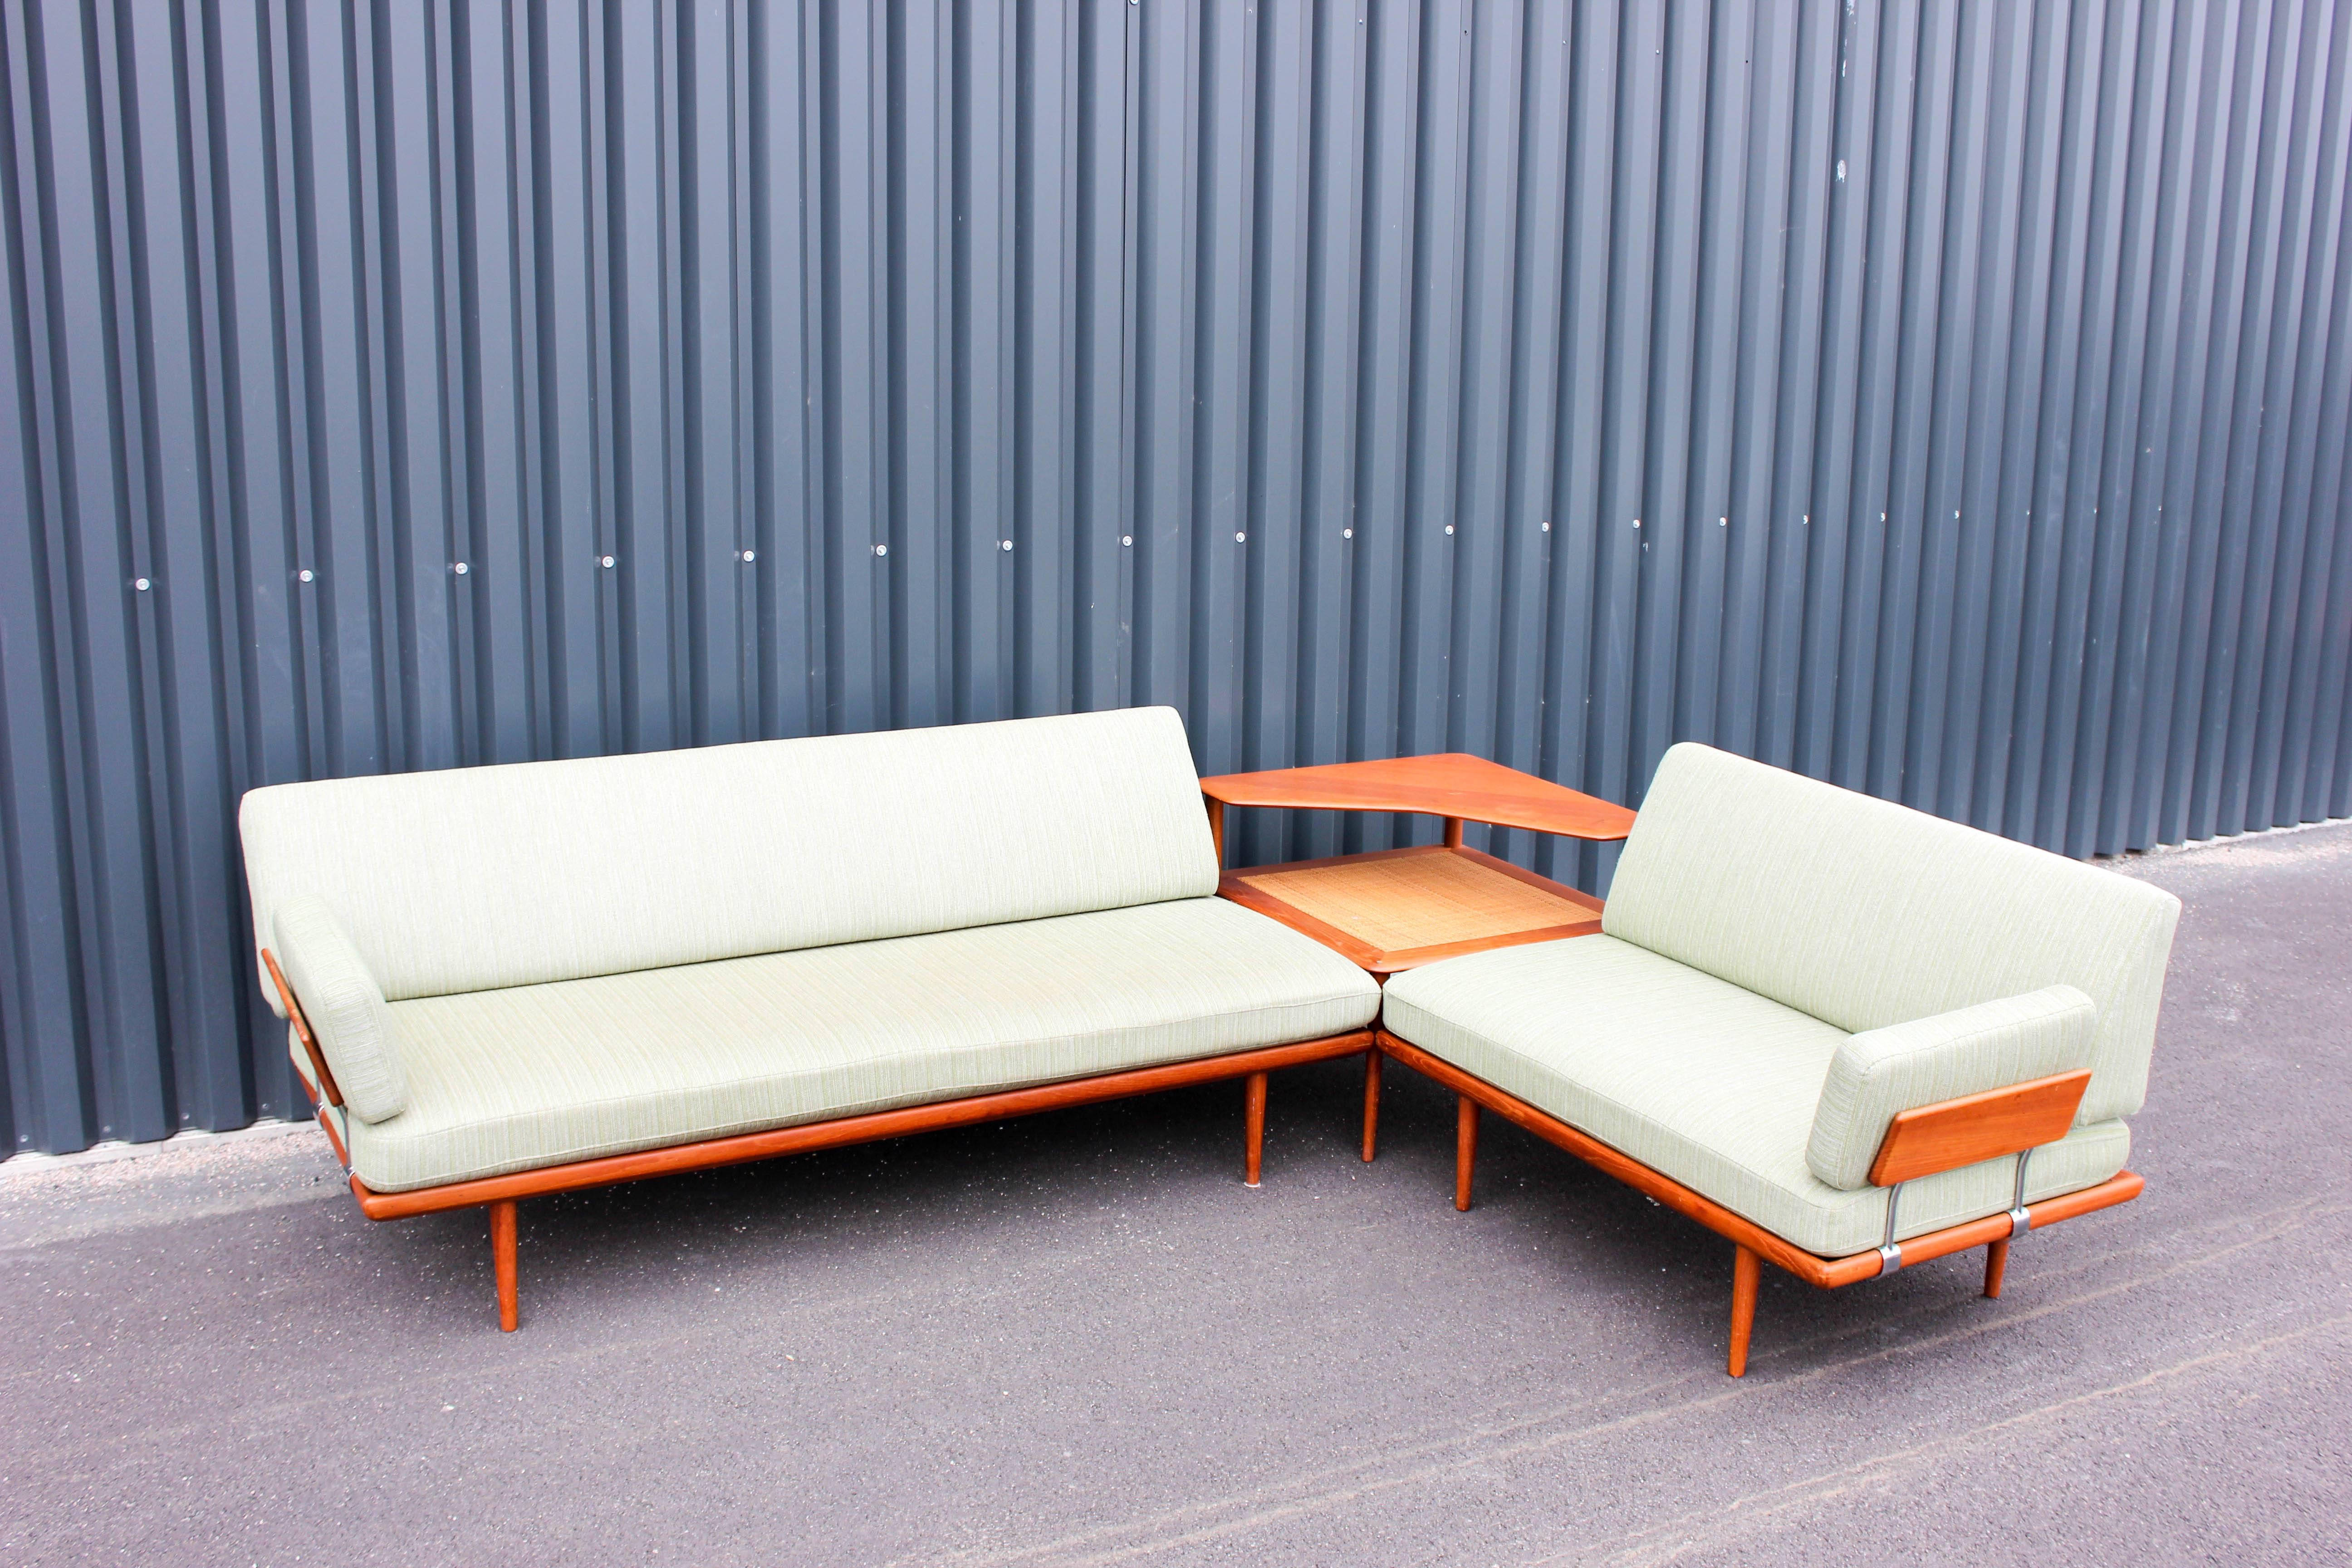 Midcentury vintage sofa set by Danish designers Peter Hvidt and Orla Mølgaard-Nielsen produced by manufacturers France & Daverkosen in the 1950s. This sofa set is famous for its design and high quality. The set contains of two sofas (daybeds) and a